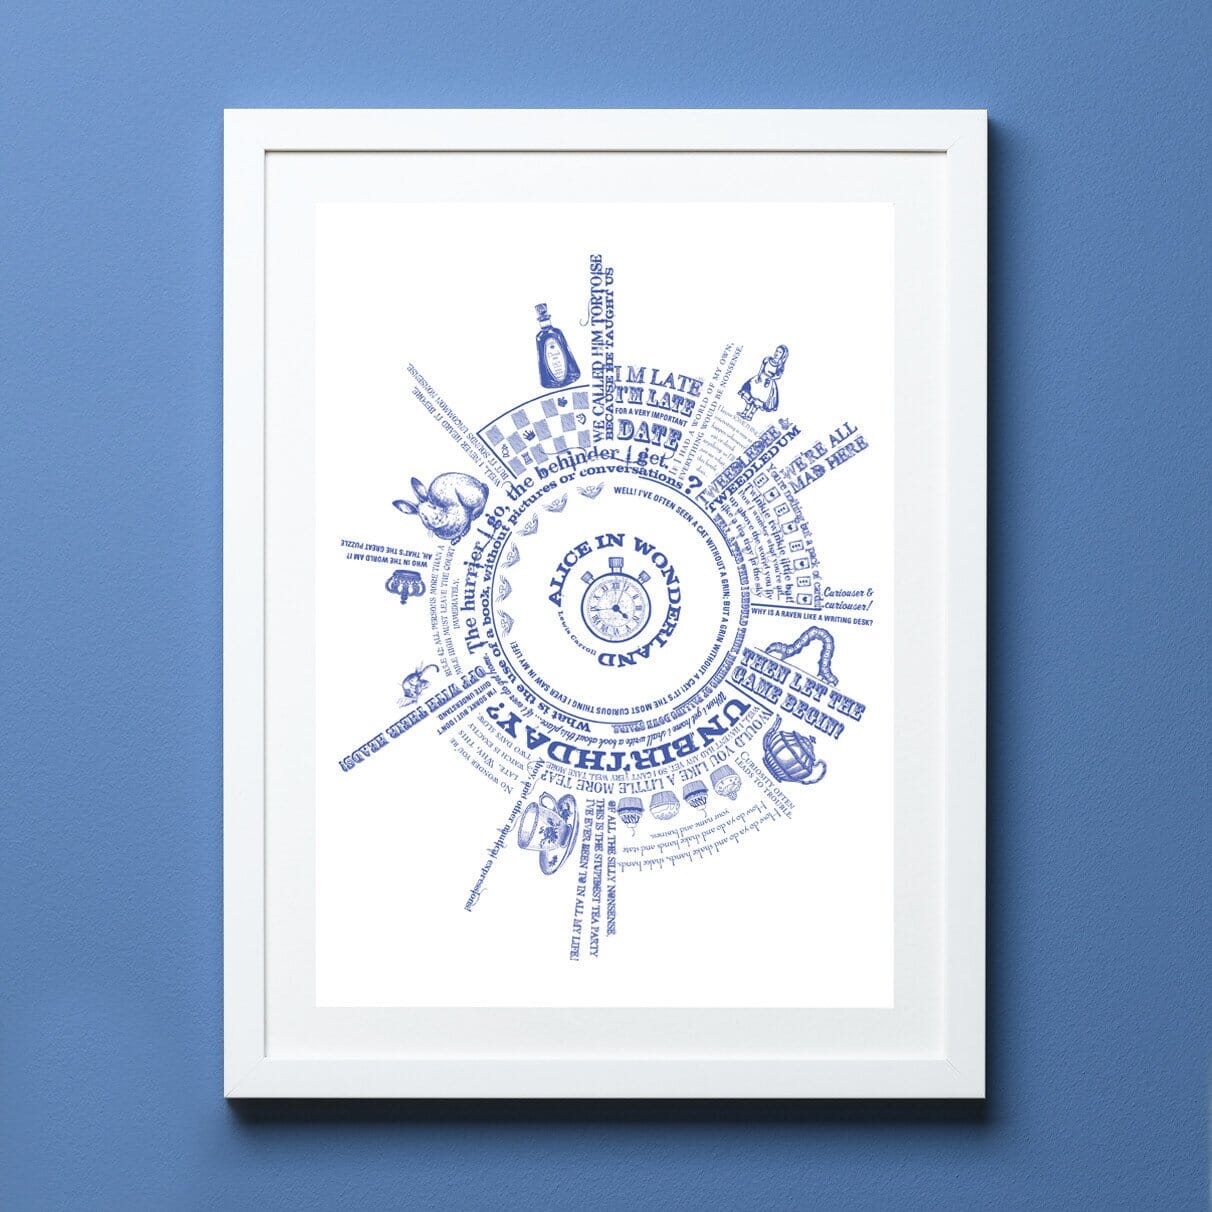 Framed print with blue typographic text printed in a circular design with quotes from the book Alice in Wonderland